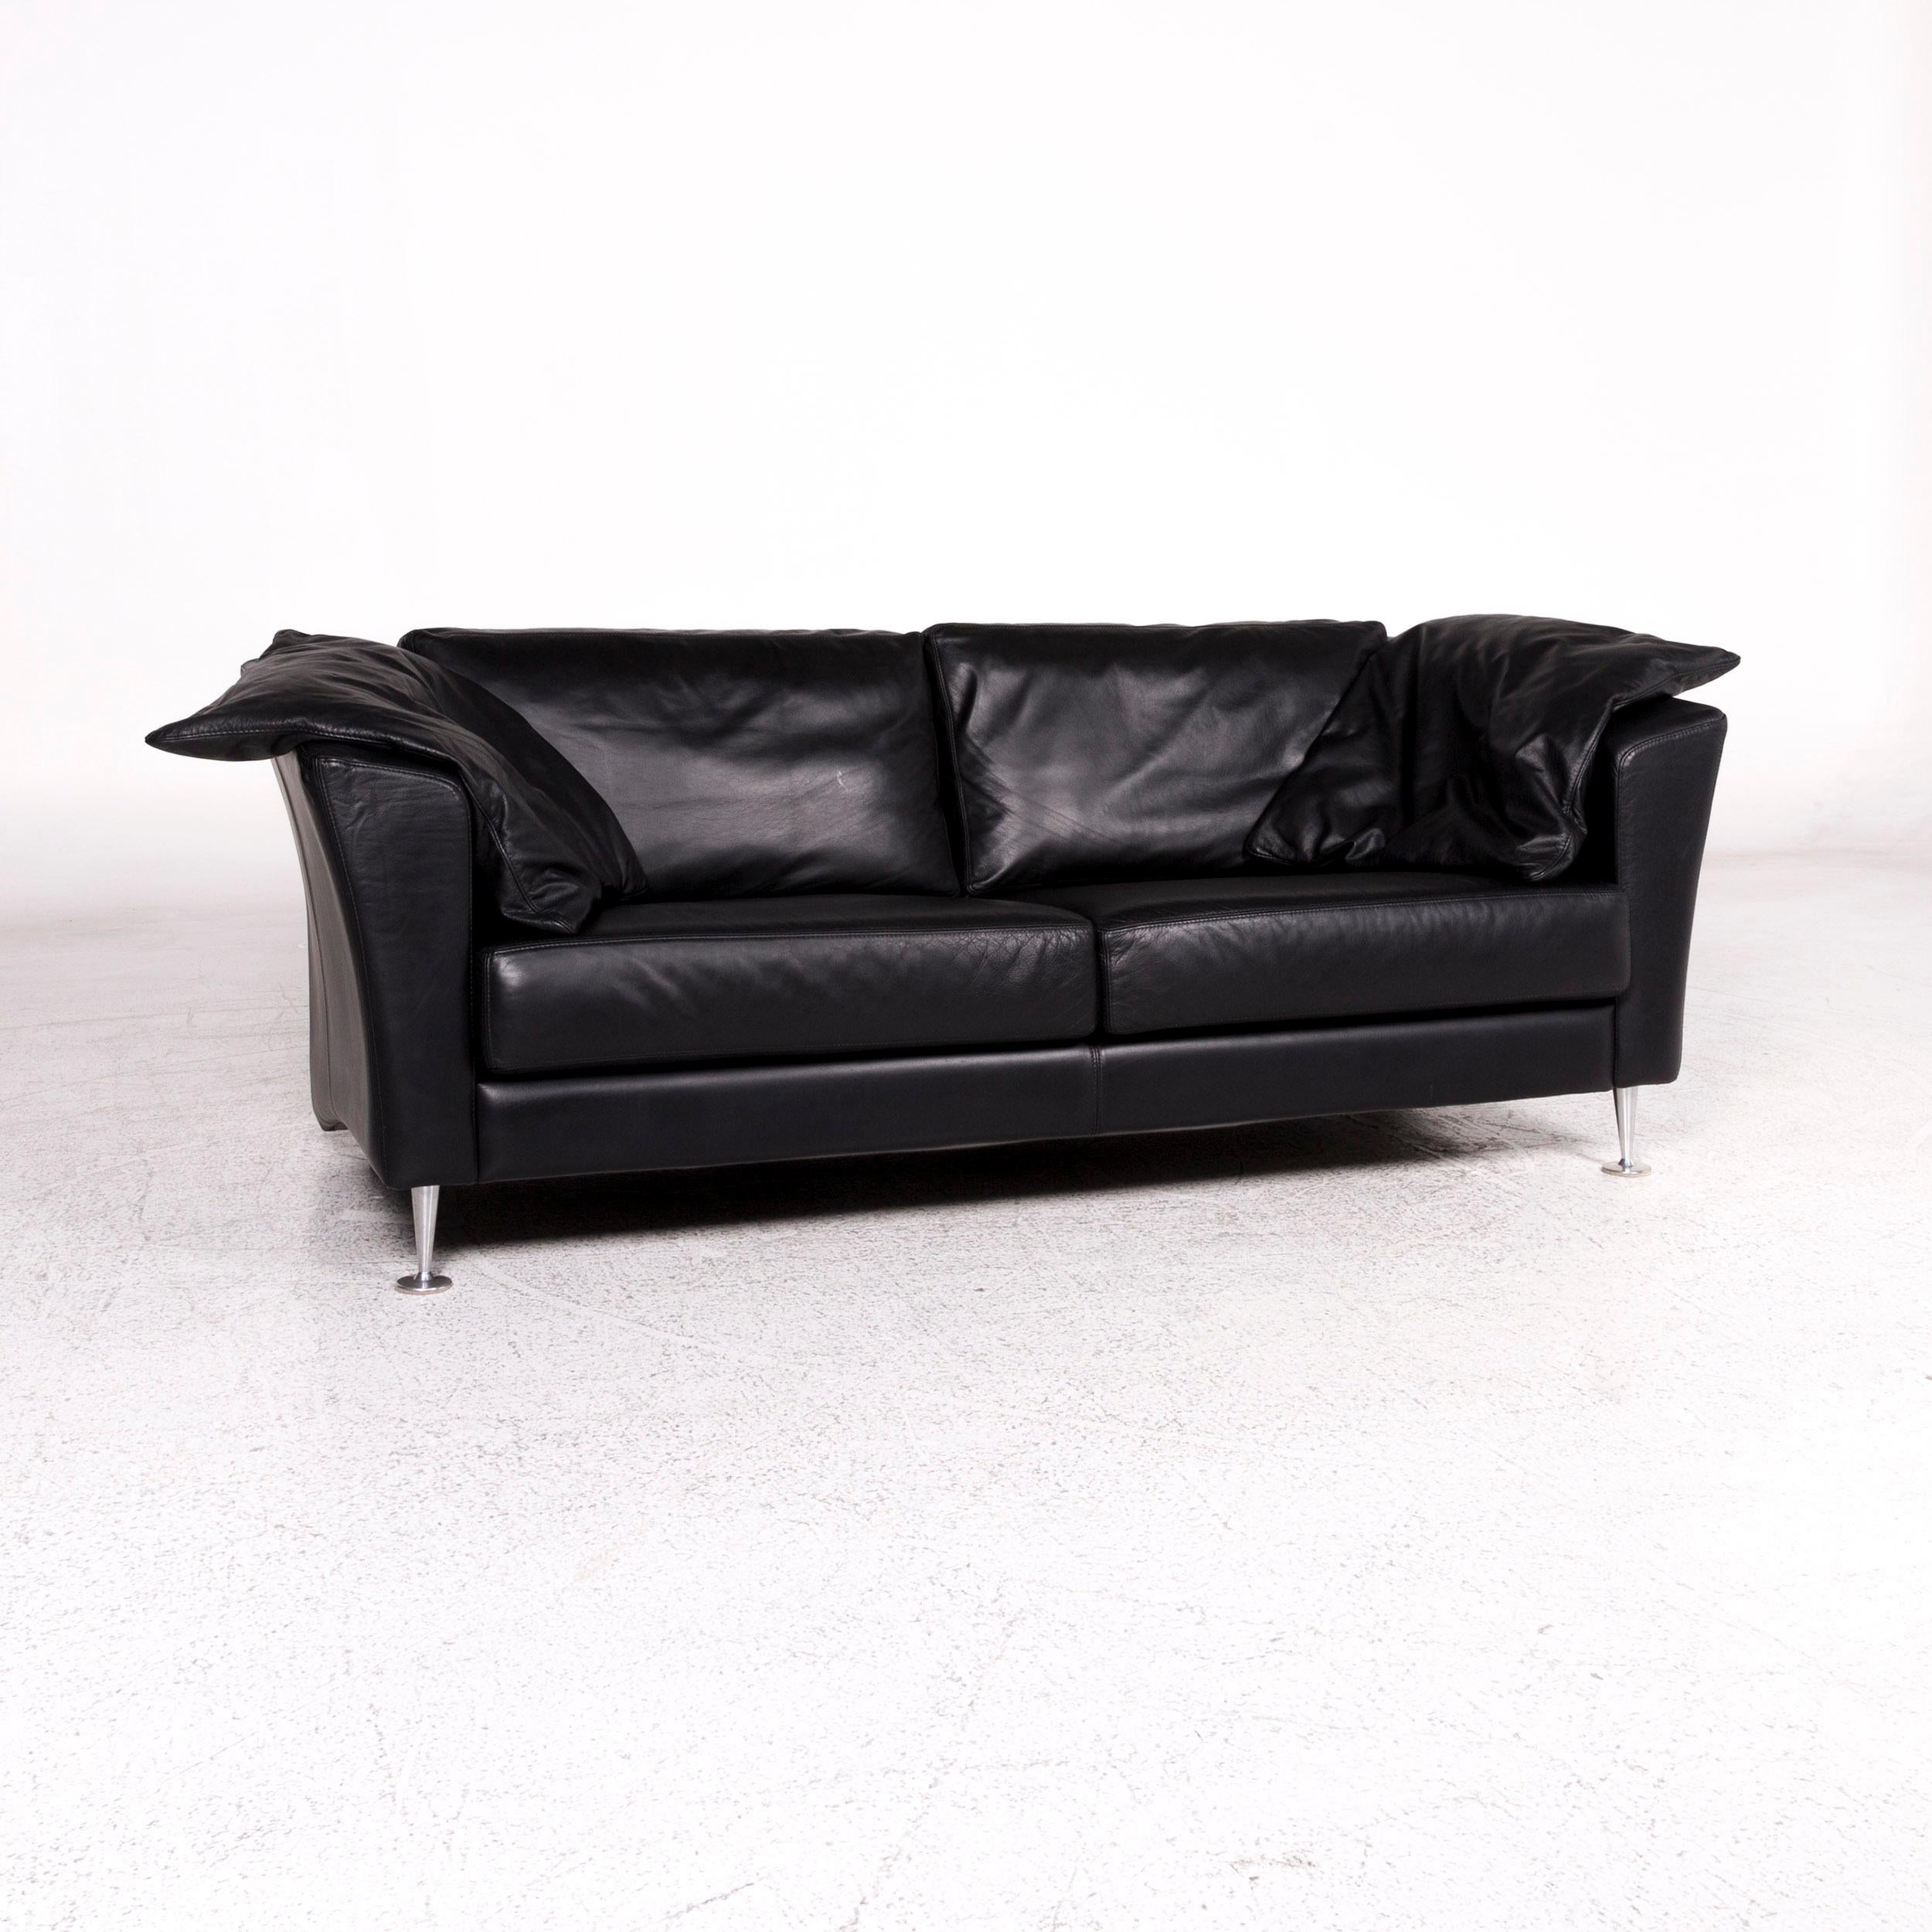 We bring to you a Molinari Leder sofa Schwarz Dreisitzer couch
 
Product measurements in centimetres:
 
Depth 101
Width 202
Height 77
Seat-height 45
Rest-height 71
Seat-depth 50
Seat-width 160
Back-height 37.

  